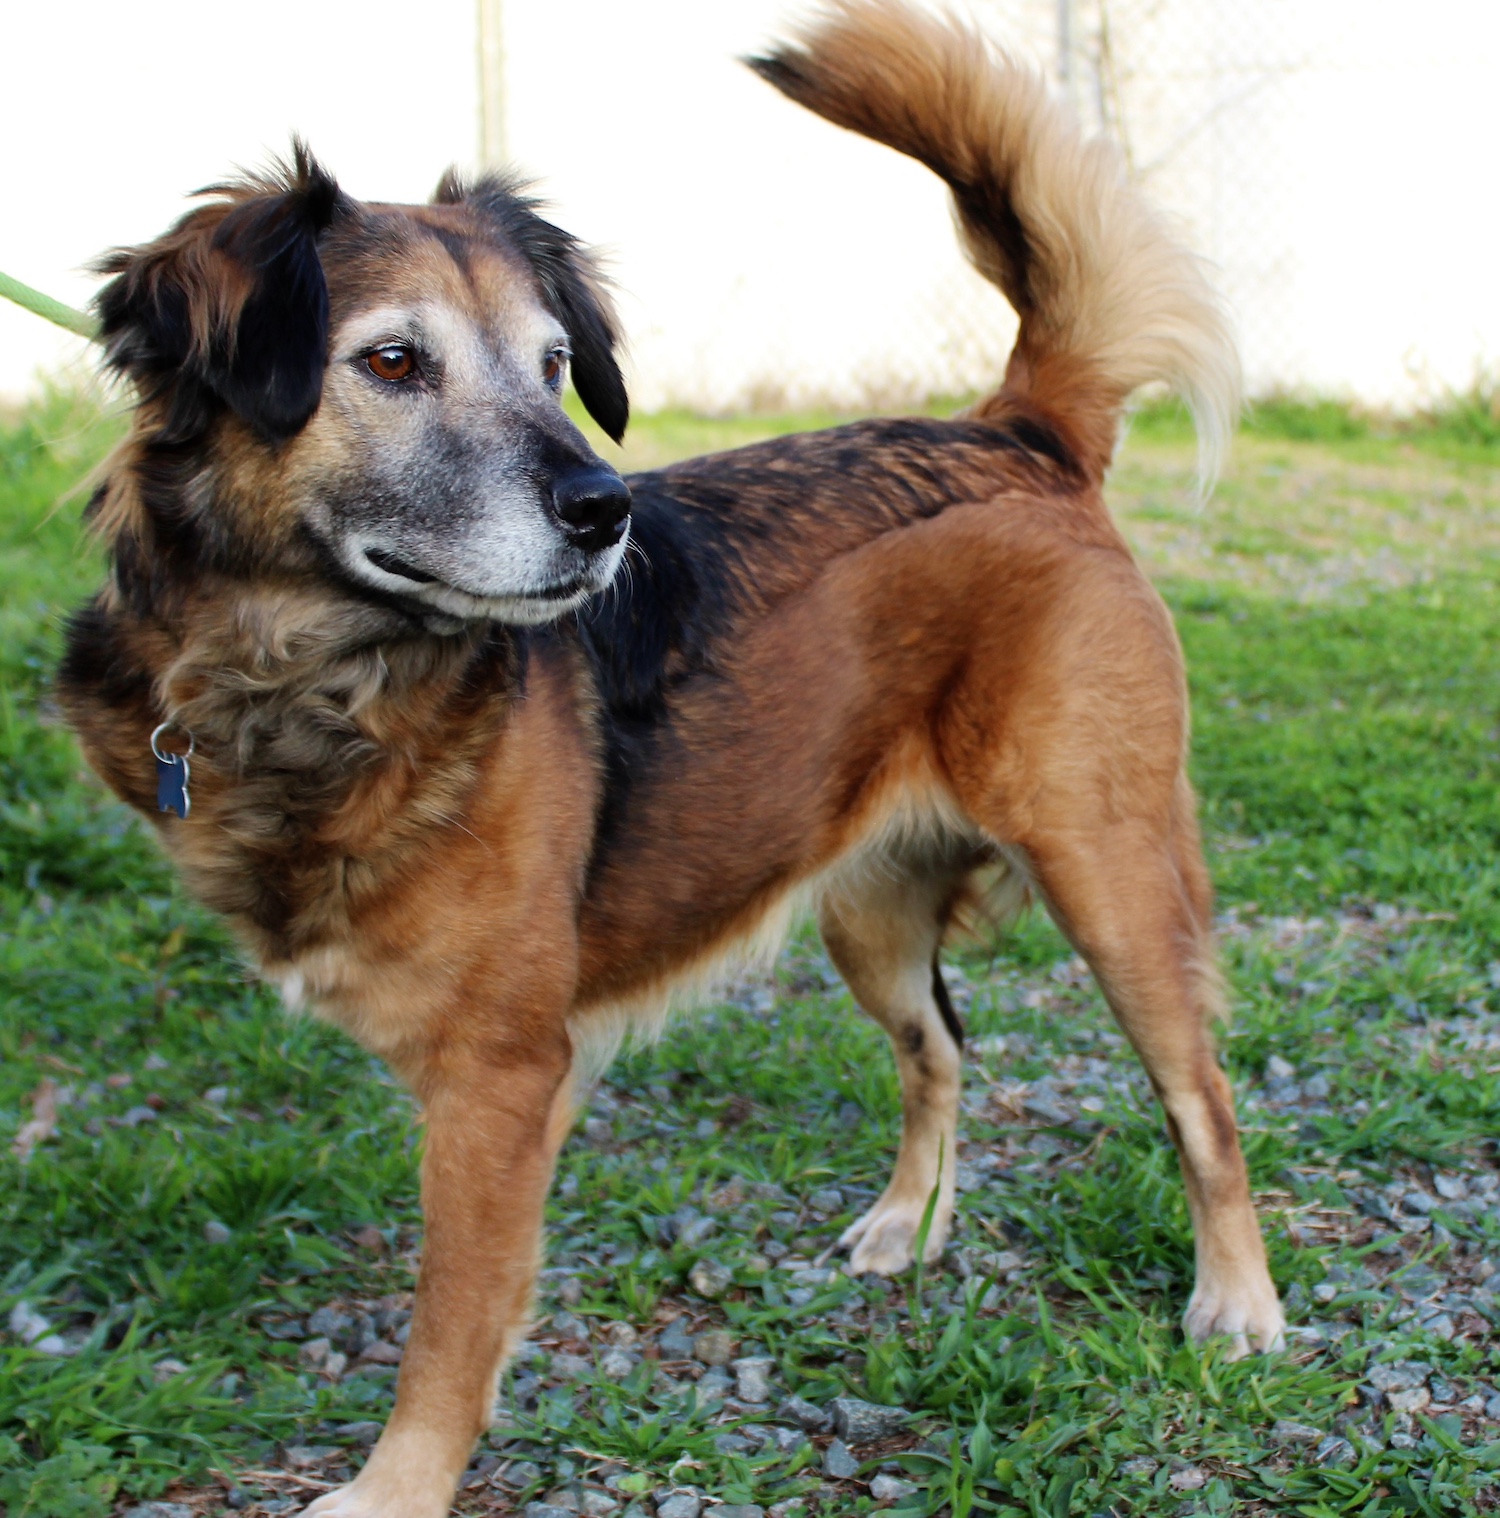 A three-legged dog with a gray muzzle standing on grass.